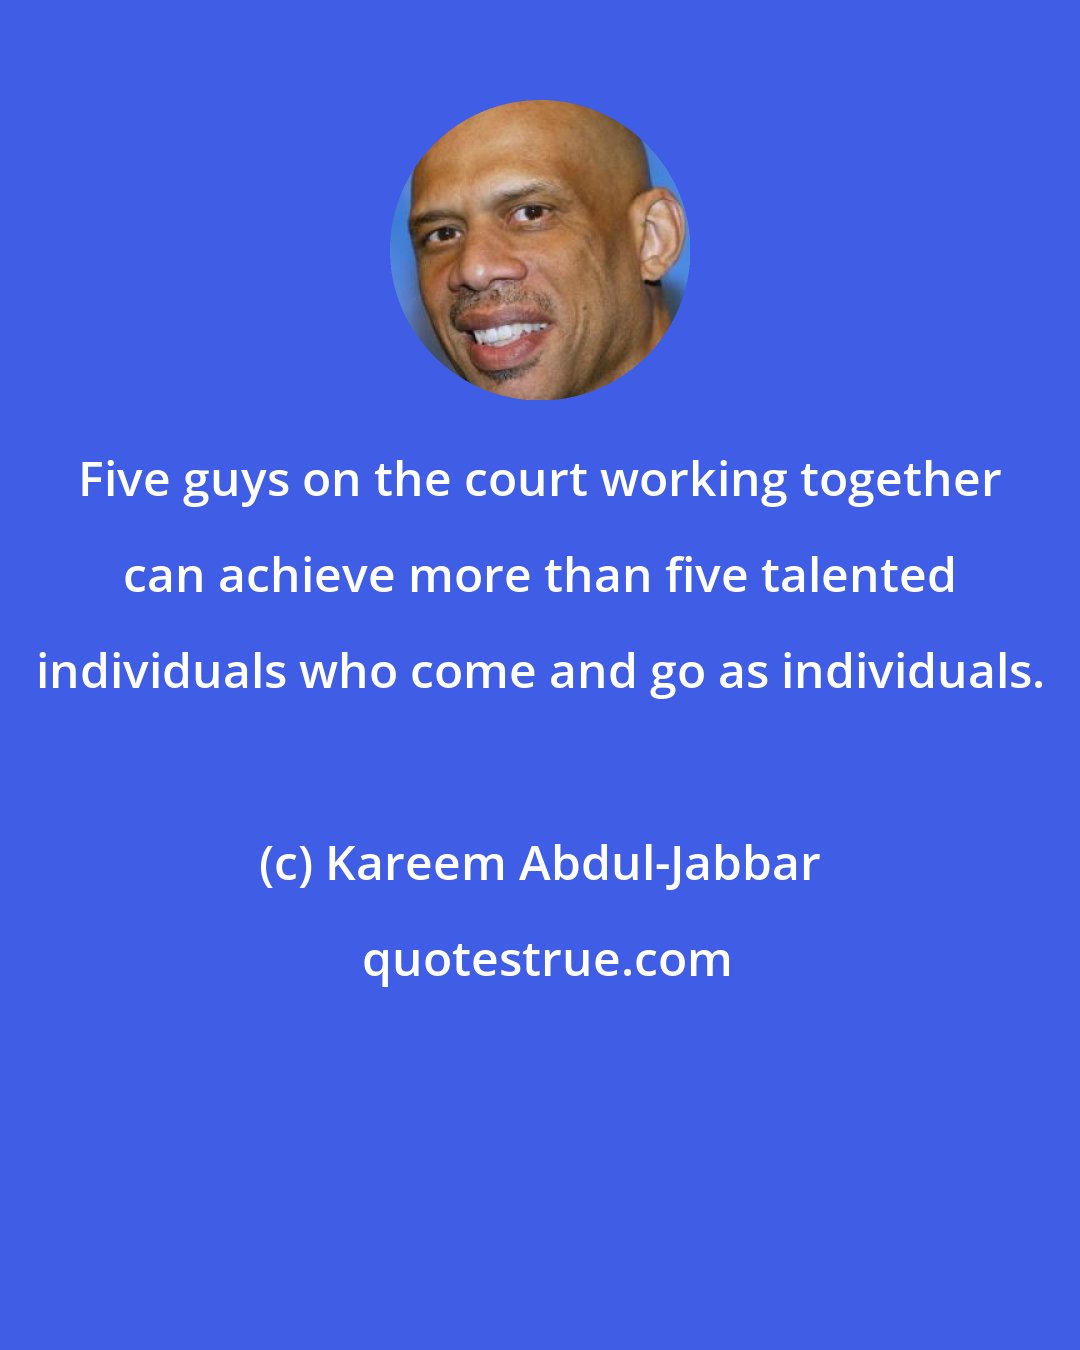 Kareem Abdul-Jabbar: Five guys on the court working together can achieve more than five talented individuals who come and go as individuals.